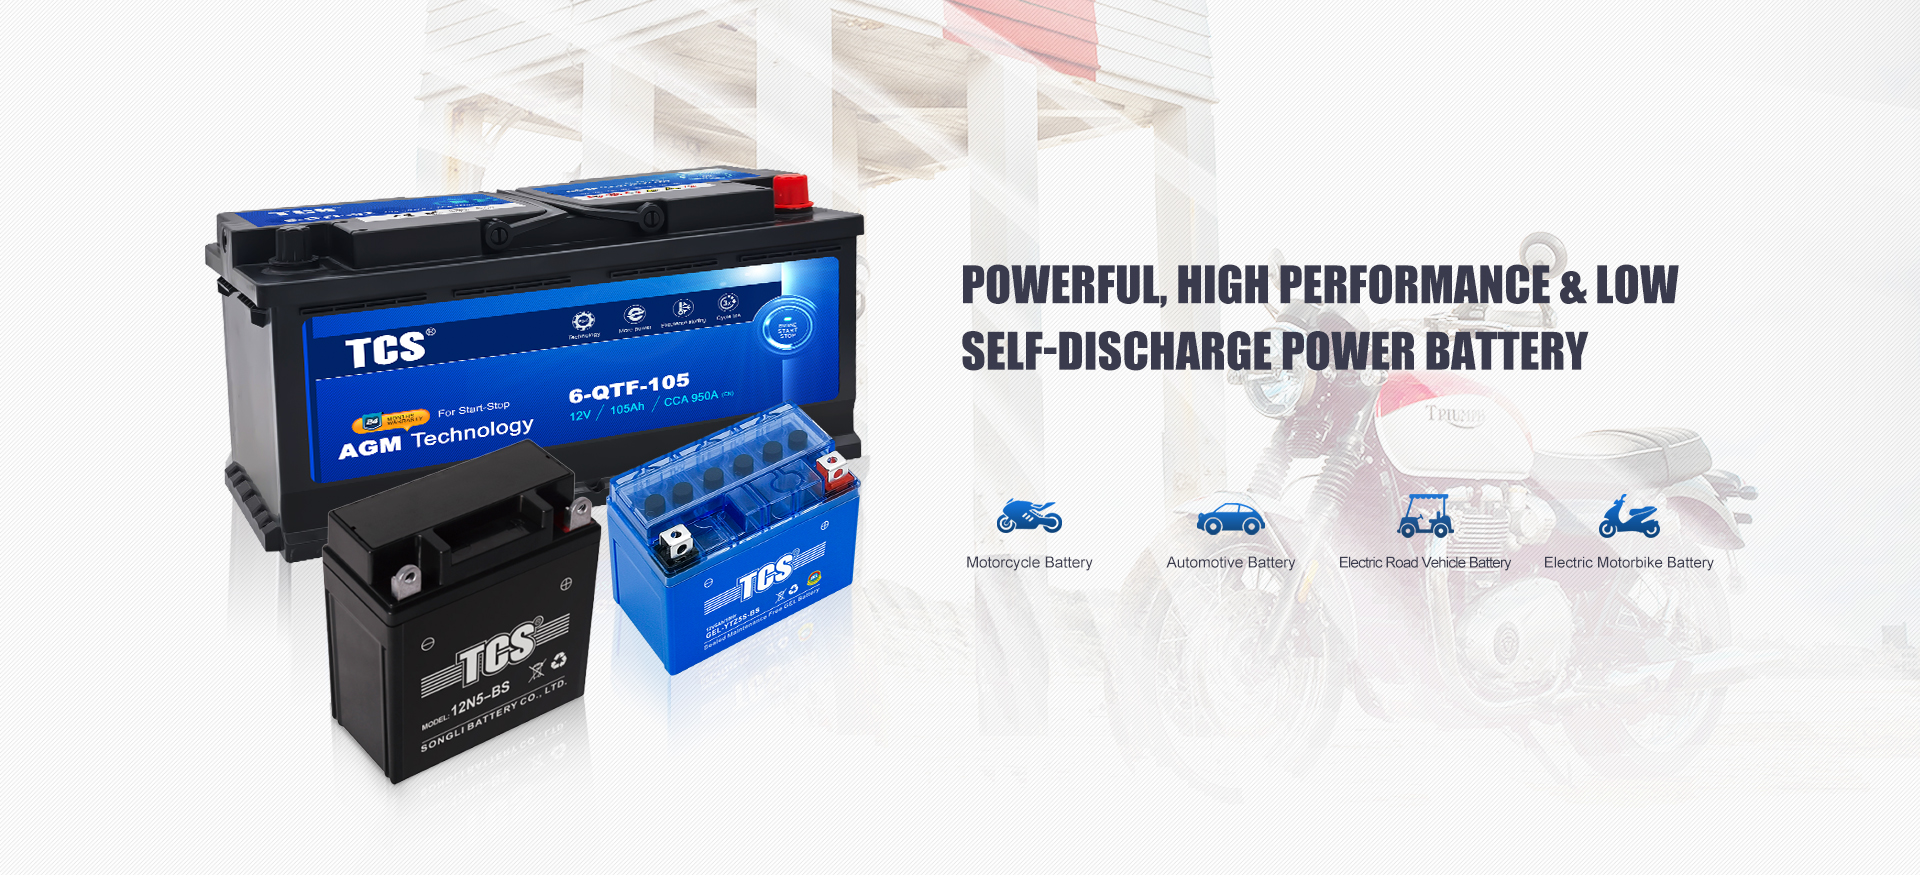 https://www.songligroup.com/motorcycle-batteries/